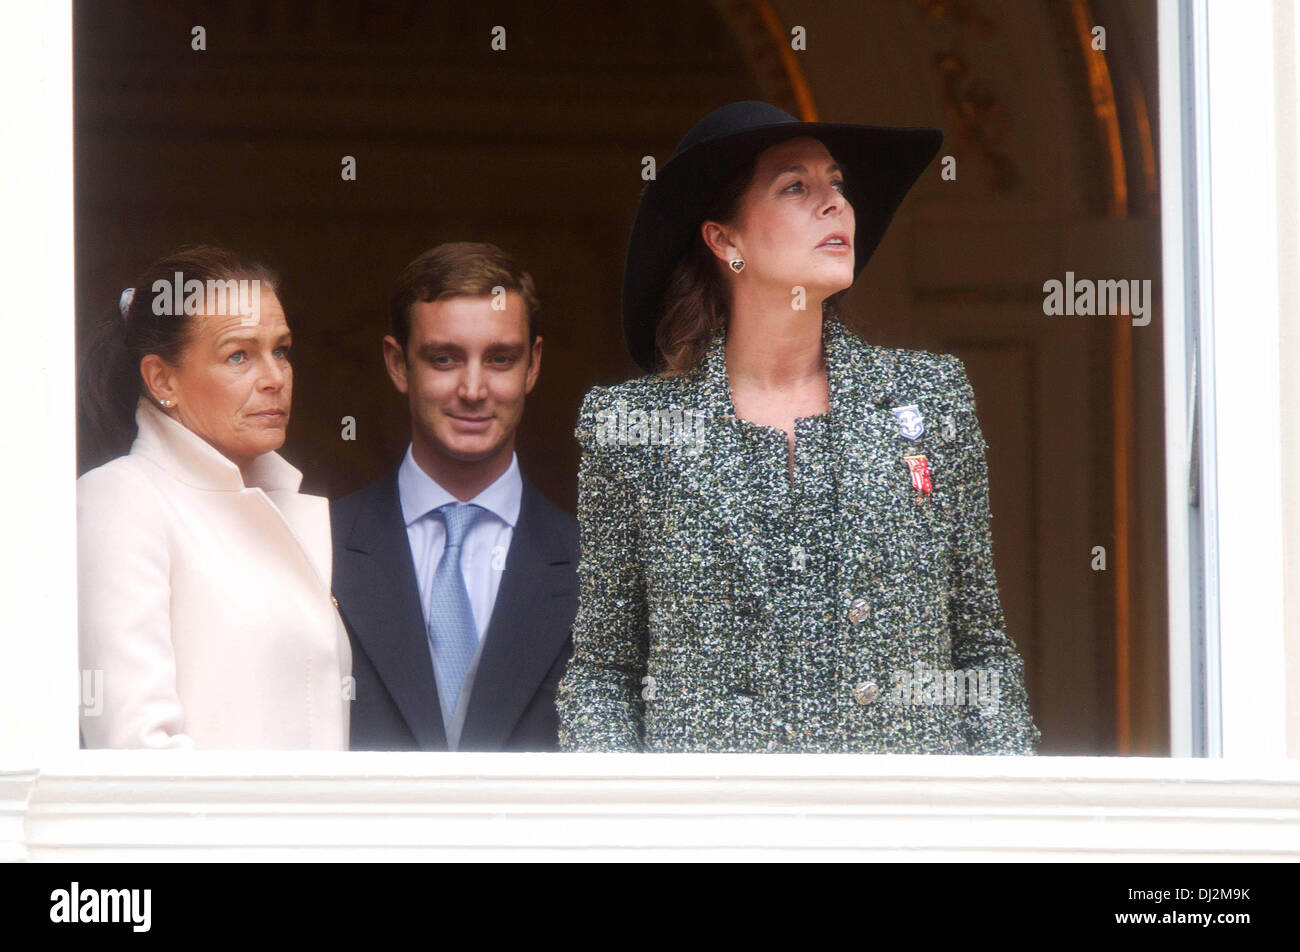 Monte Carlo, Monaco. 19th Nov, 2013. Princess Caroline of Hanover (R), her sister Princess Stephanie of Monaco and her son Pierre Casiraghi attend the Army Parade, as part of the official ceremonies for the Monaco National Day in Monte Carlo, Monaco, 19 November 2013. Photo: Albert Philip van der Werf/dpa/Alamy Live News Stock Photo